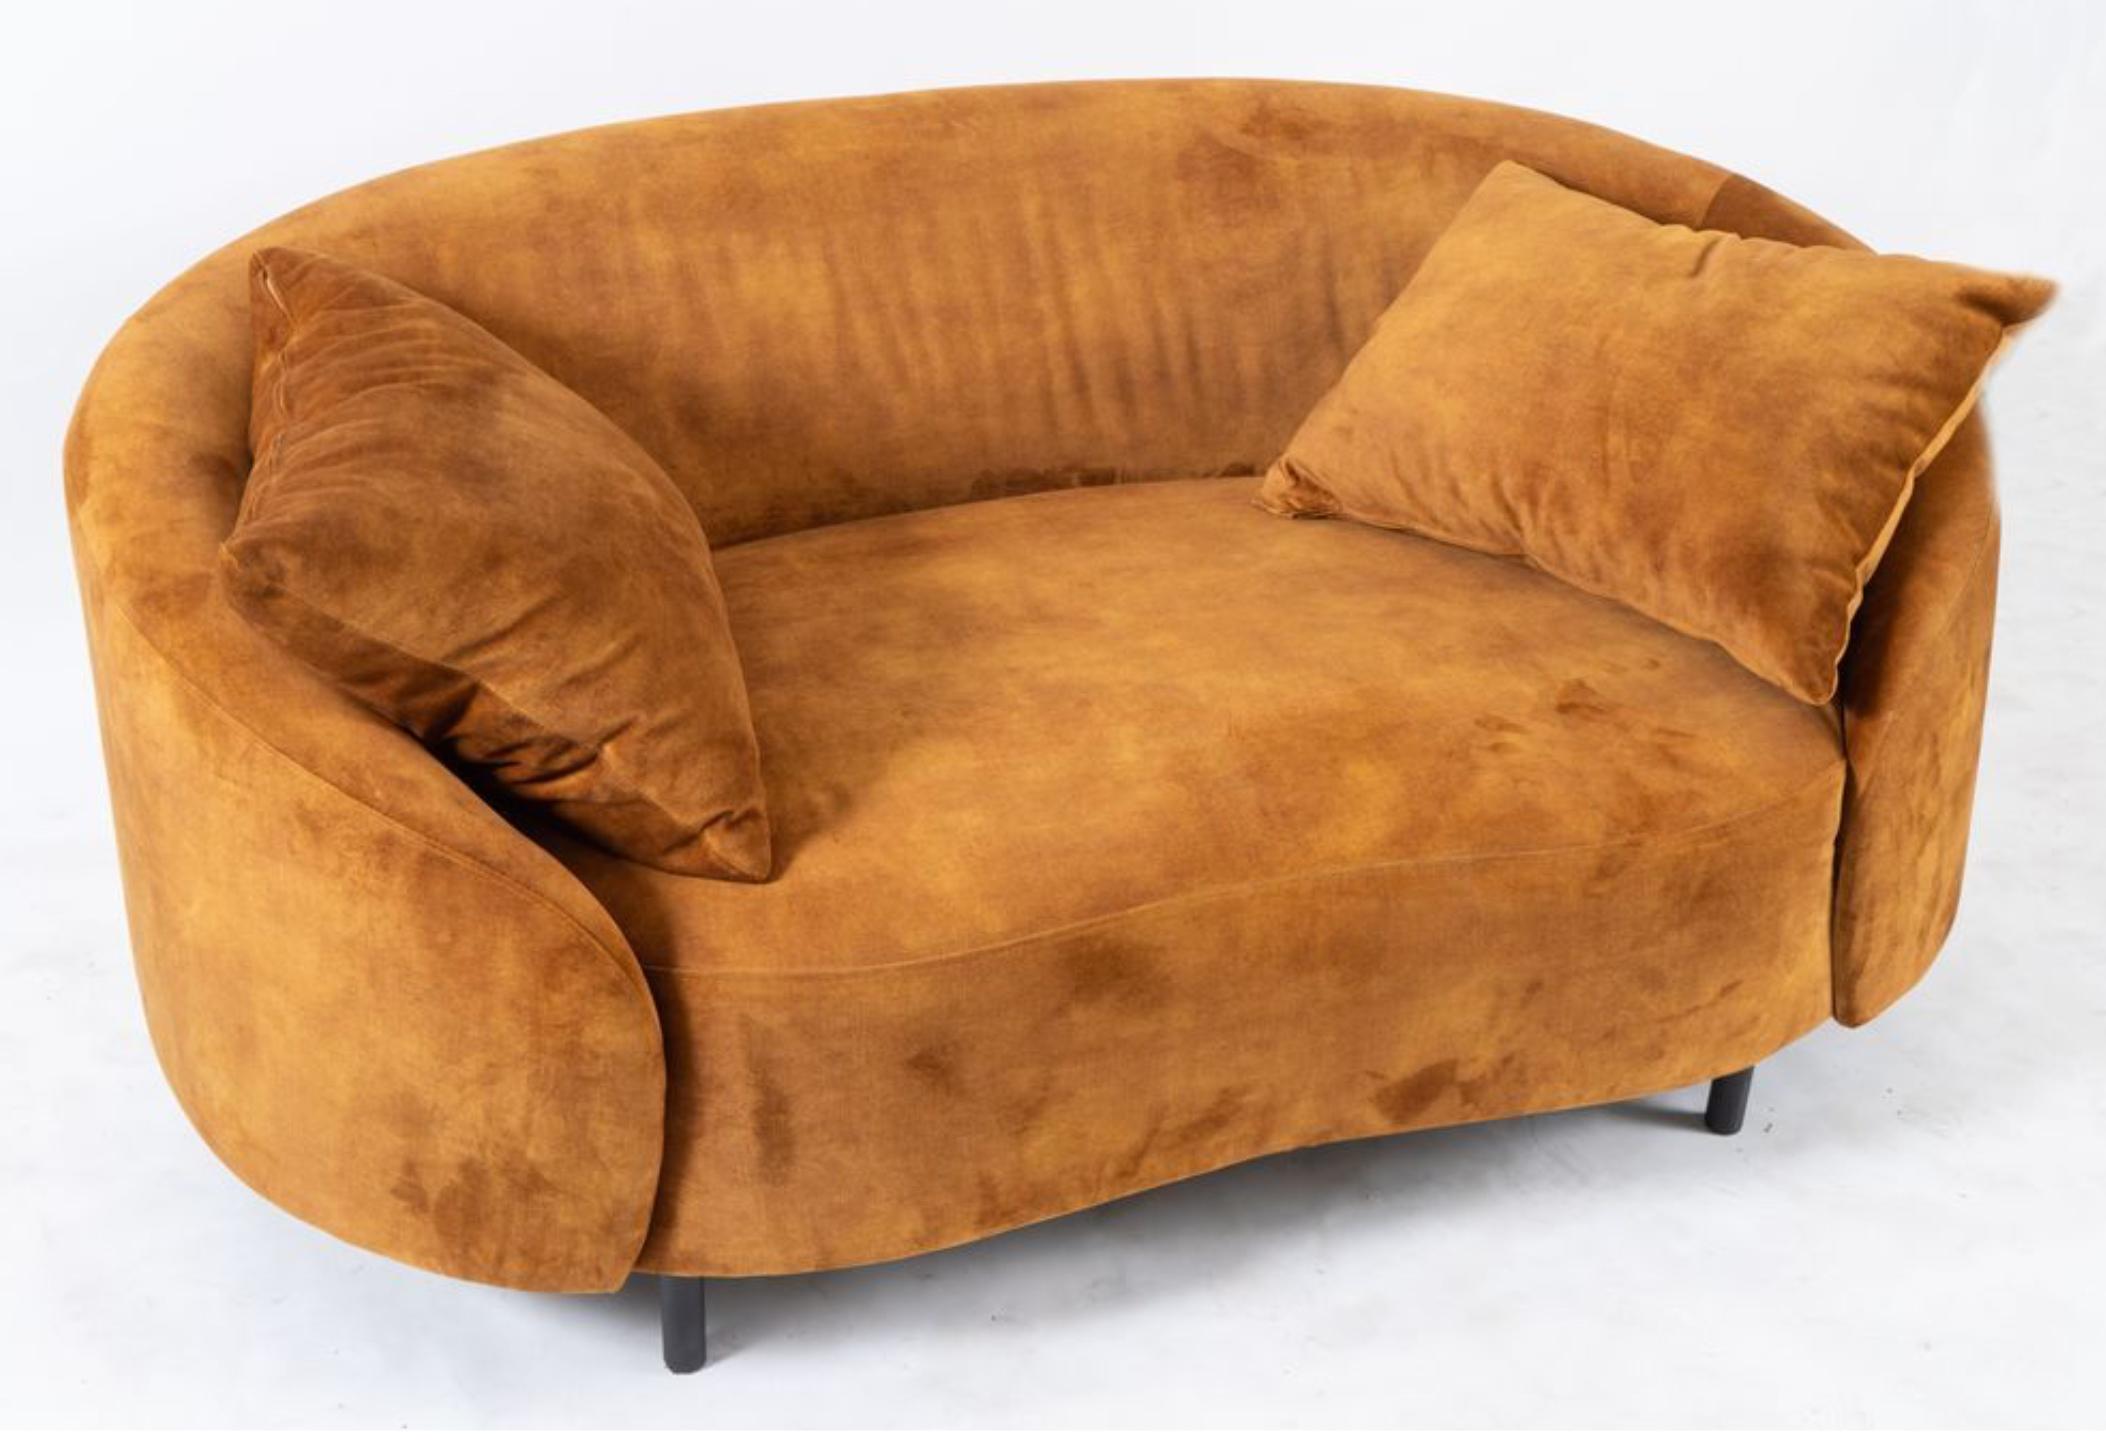 Living Divani Sofa with wooden frame and upholstered in fabric in light brown. Very comfortable piece made in unique shape.
Original trademark. Prod. Living Divani, Italy, c. 2000. 
Measurements 68 x 148 x 84 cm.